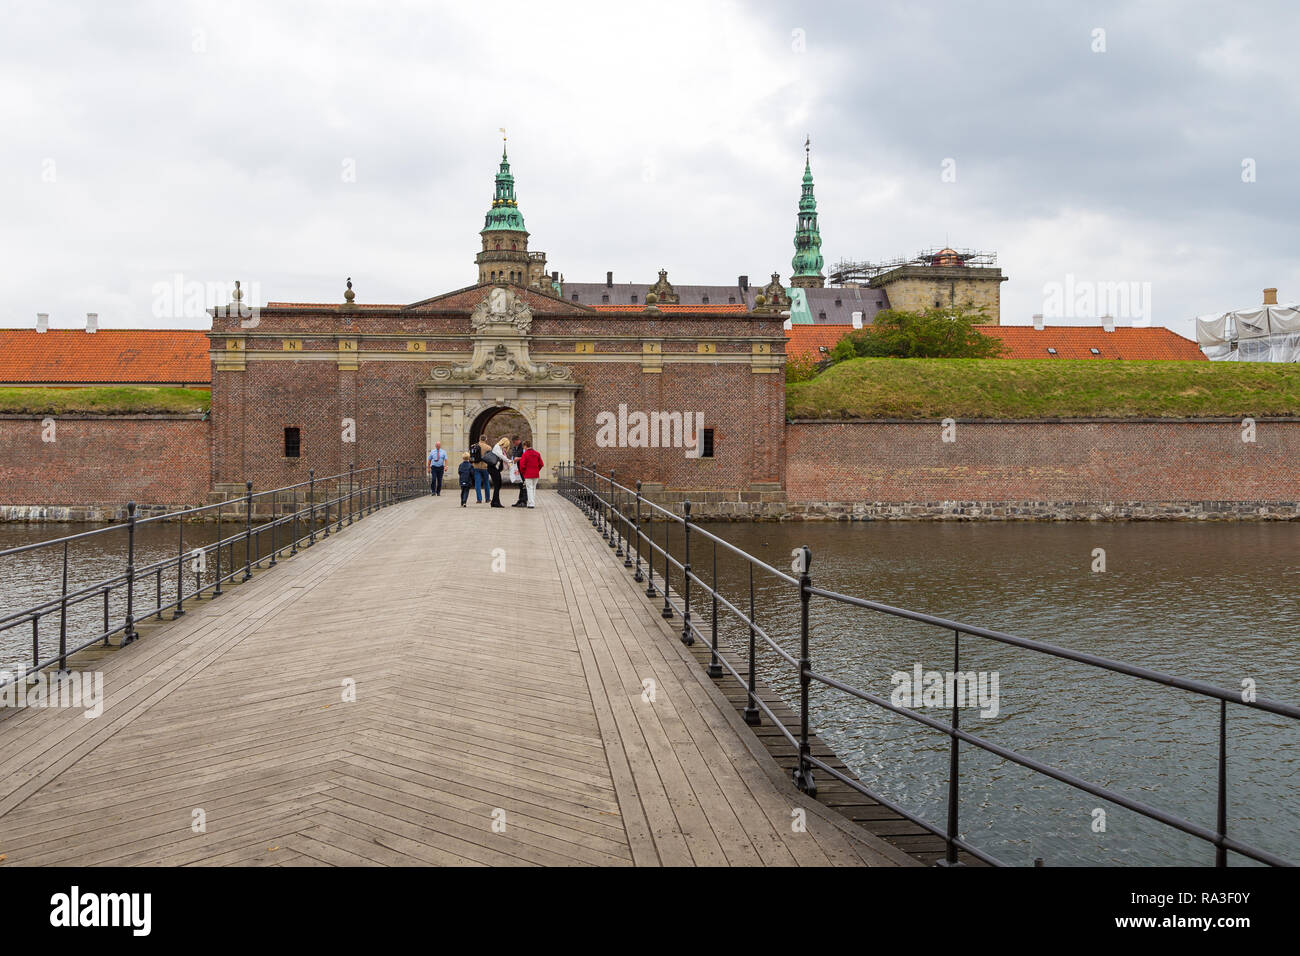 Helsingor, Denmark- 30 August 2014: View of the entrance gate to the Kronborg Palace. Kronborg Palace, most important Renaissance palace in Northern E Stock Photo